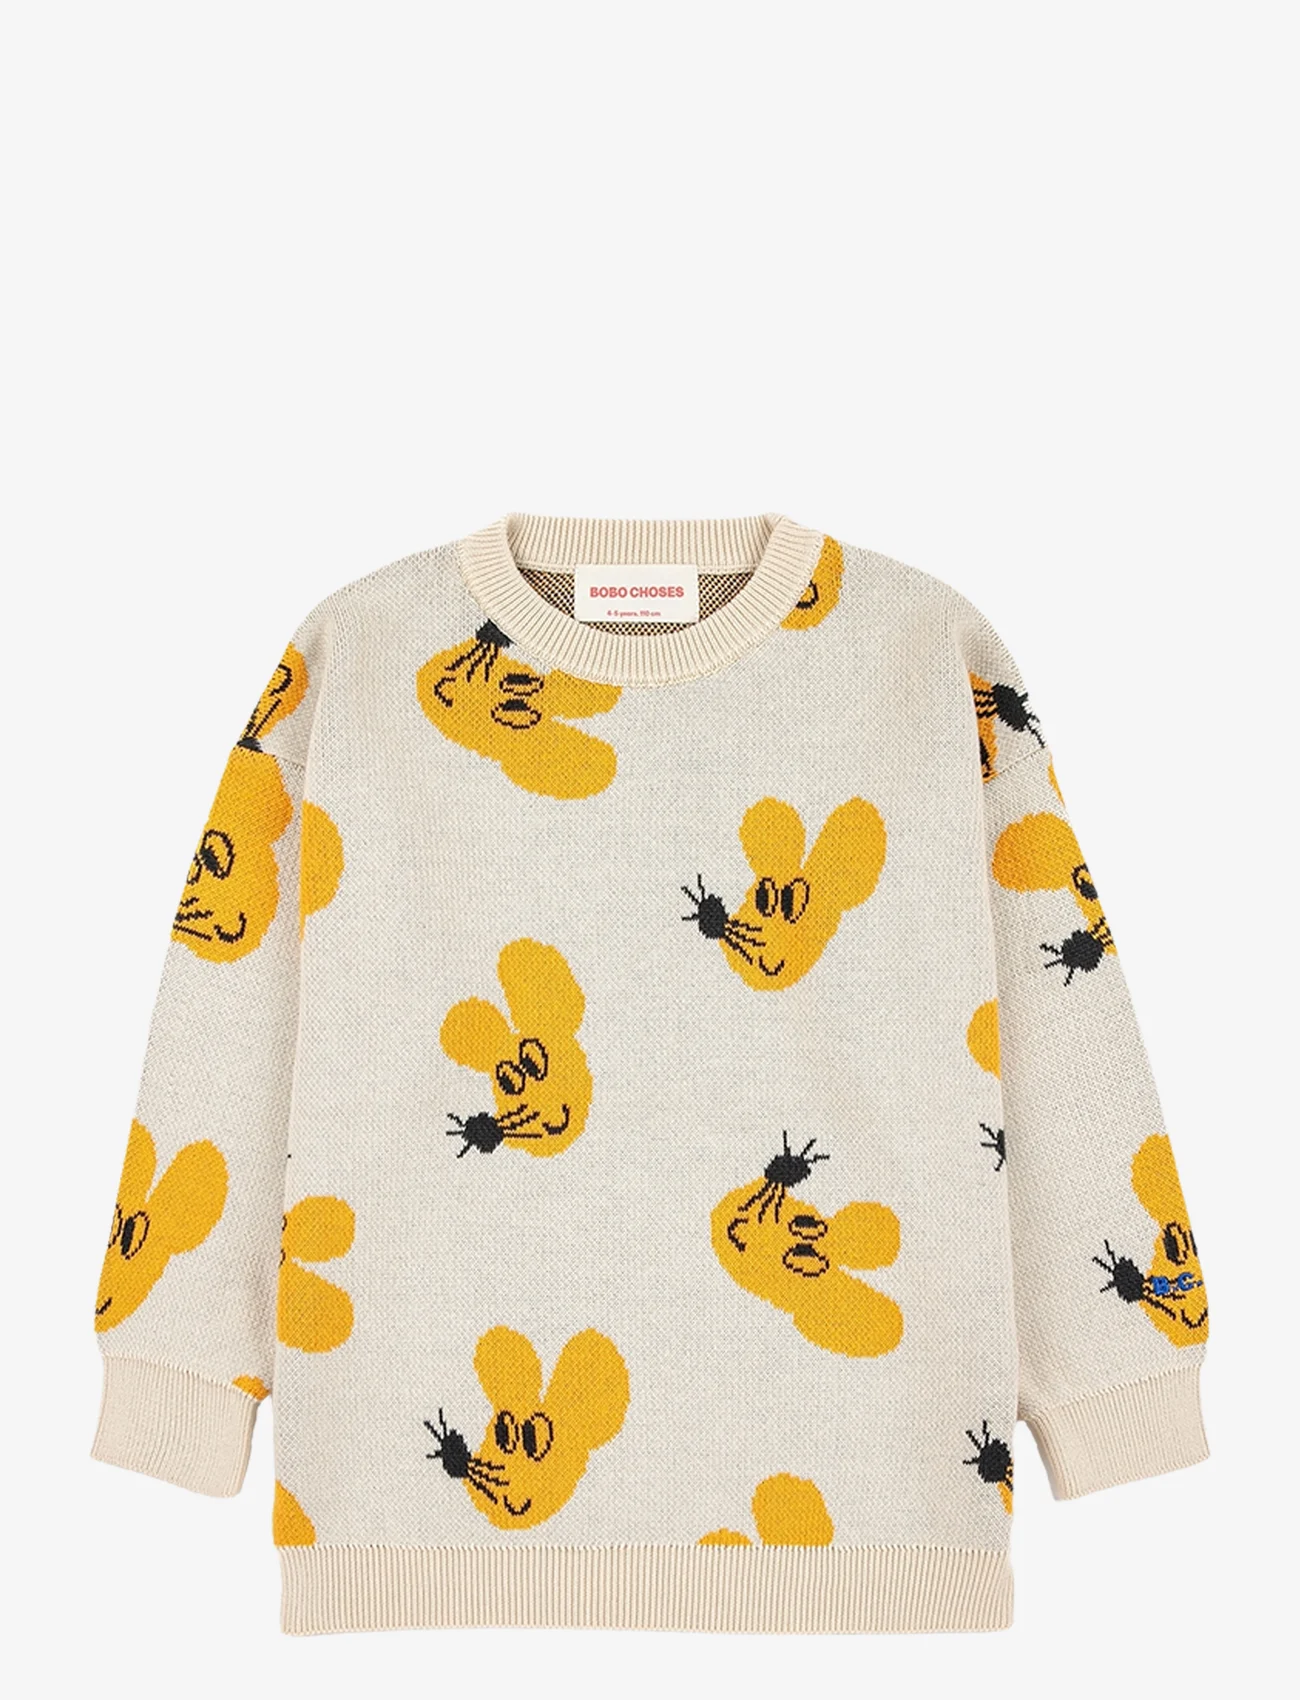 Bobo Choses - Mouse all over jacquard cotton jumper - neulepuserot - offwhite - 0